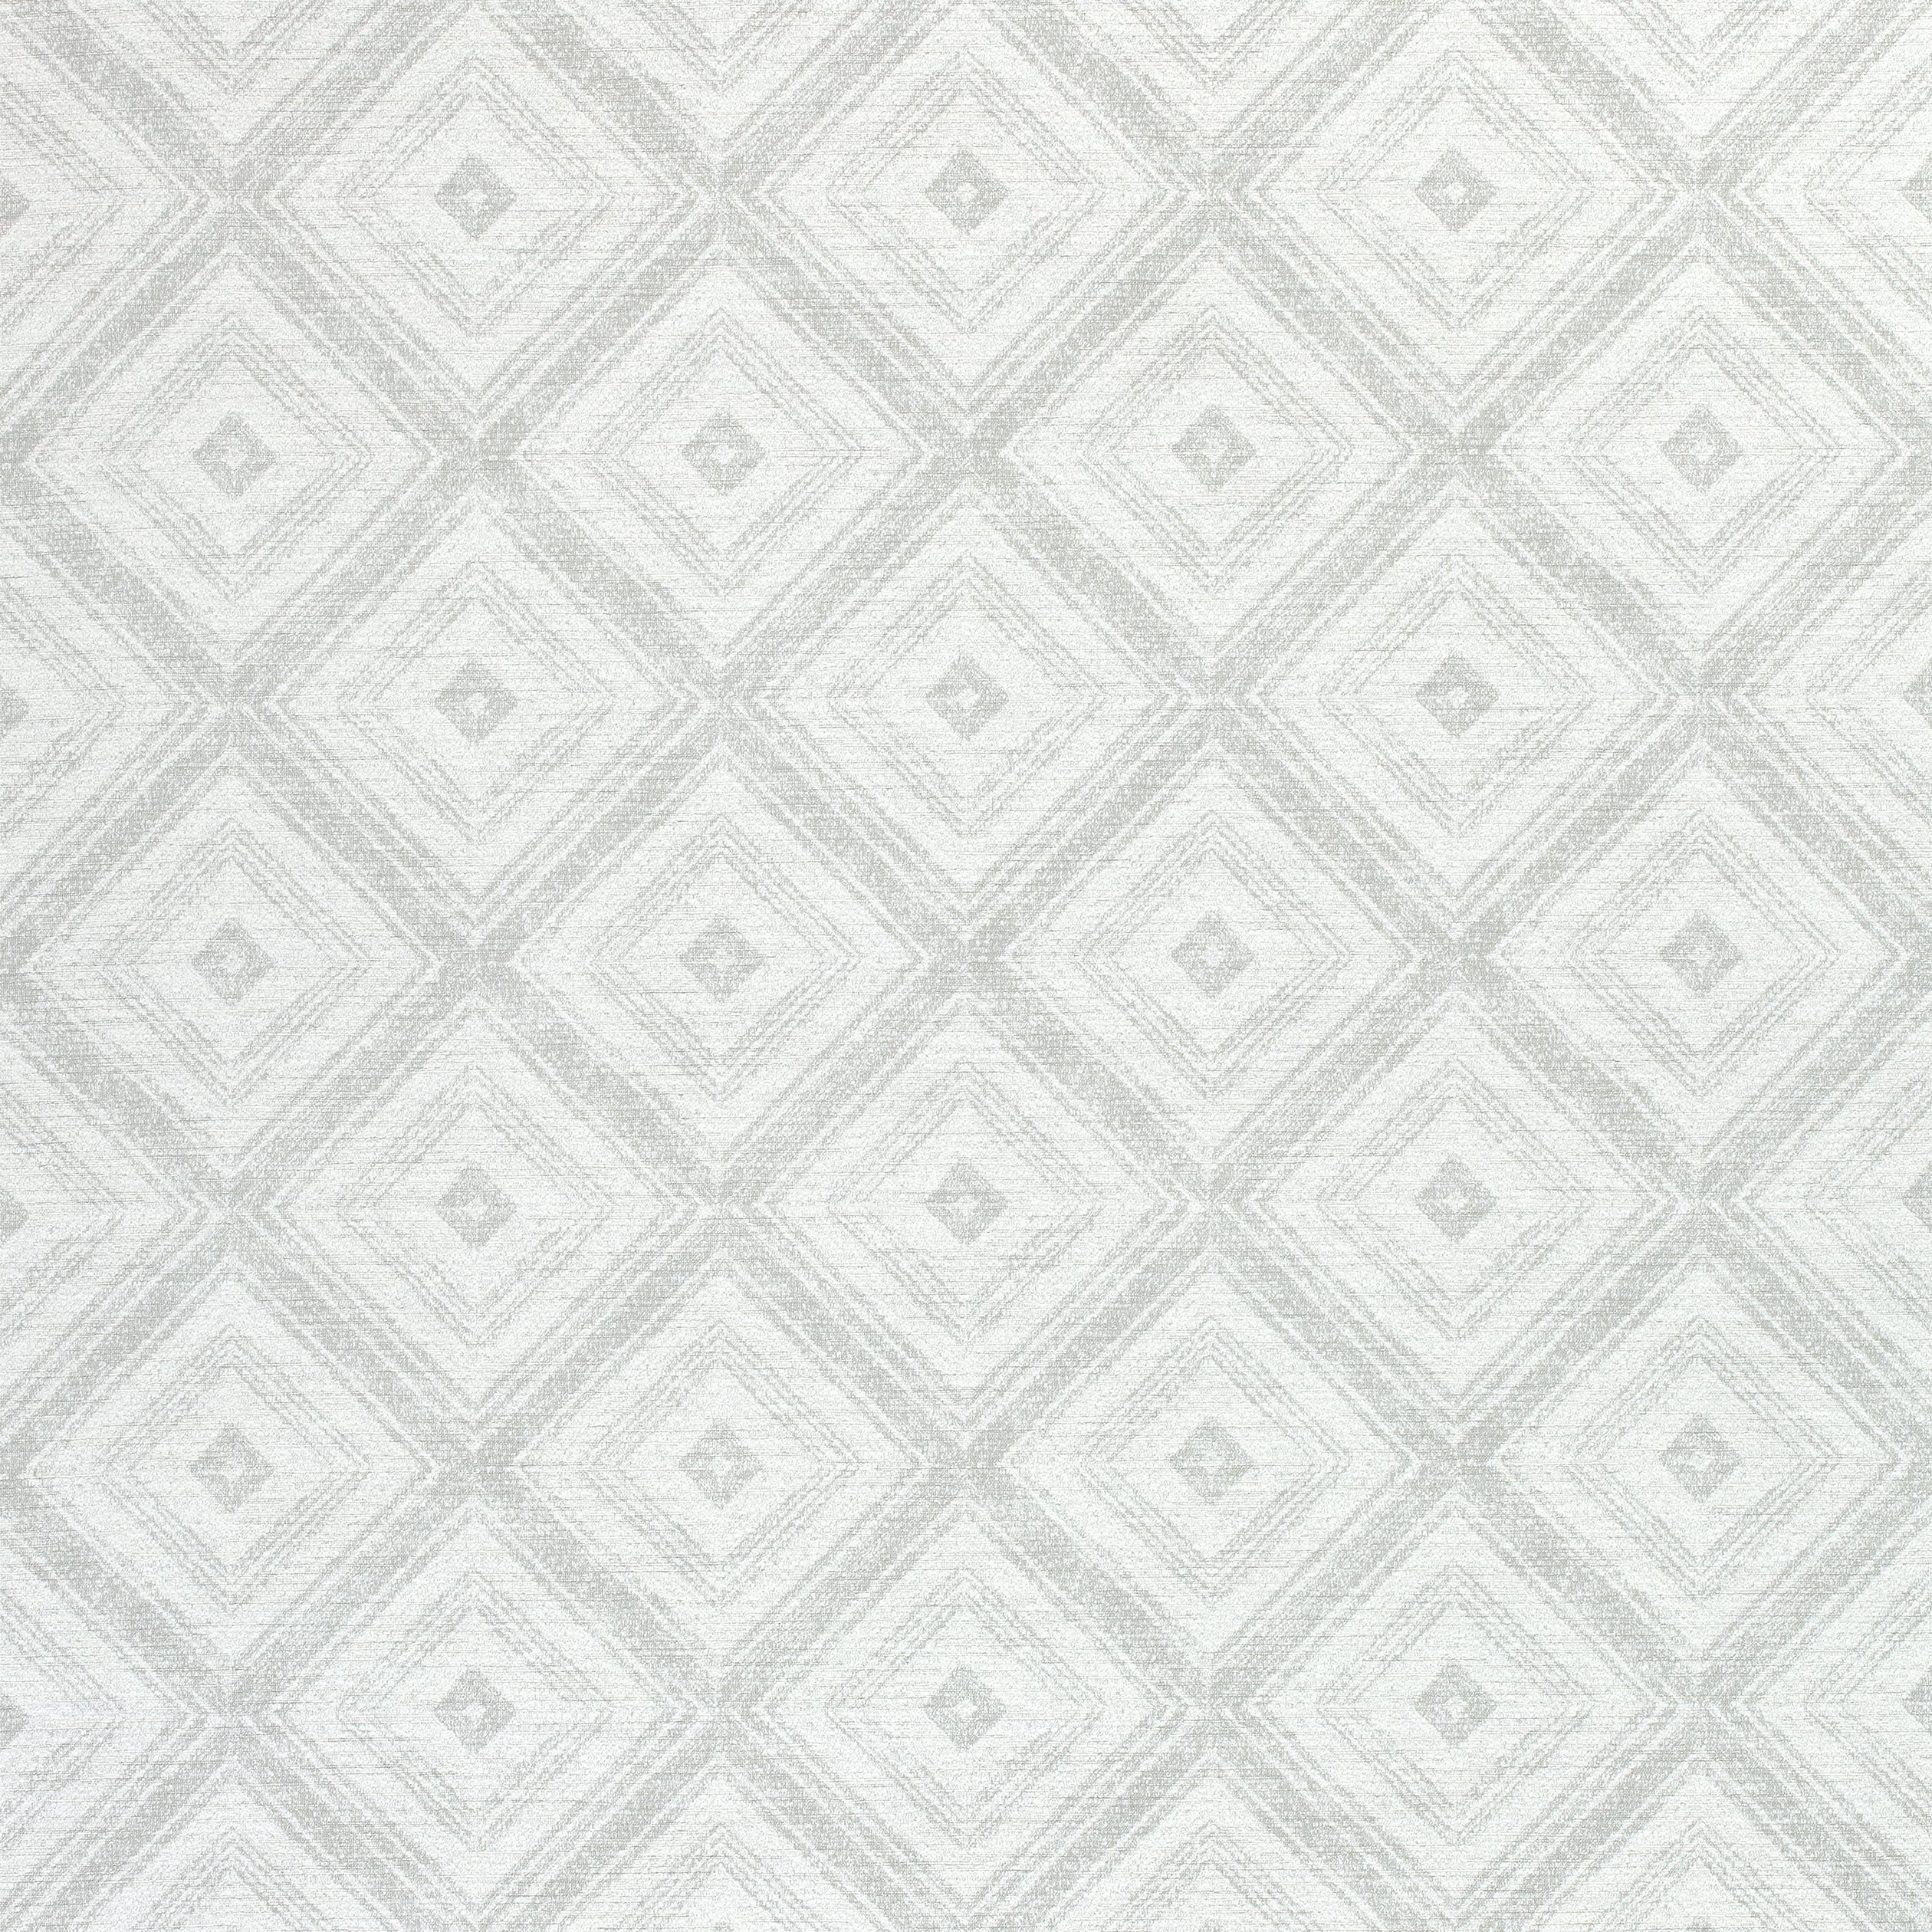 Ellison fabric in fog color - pattern number W789126 - by Thibaut in the Reverie collection